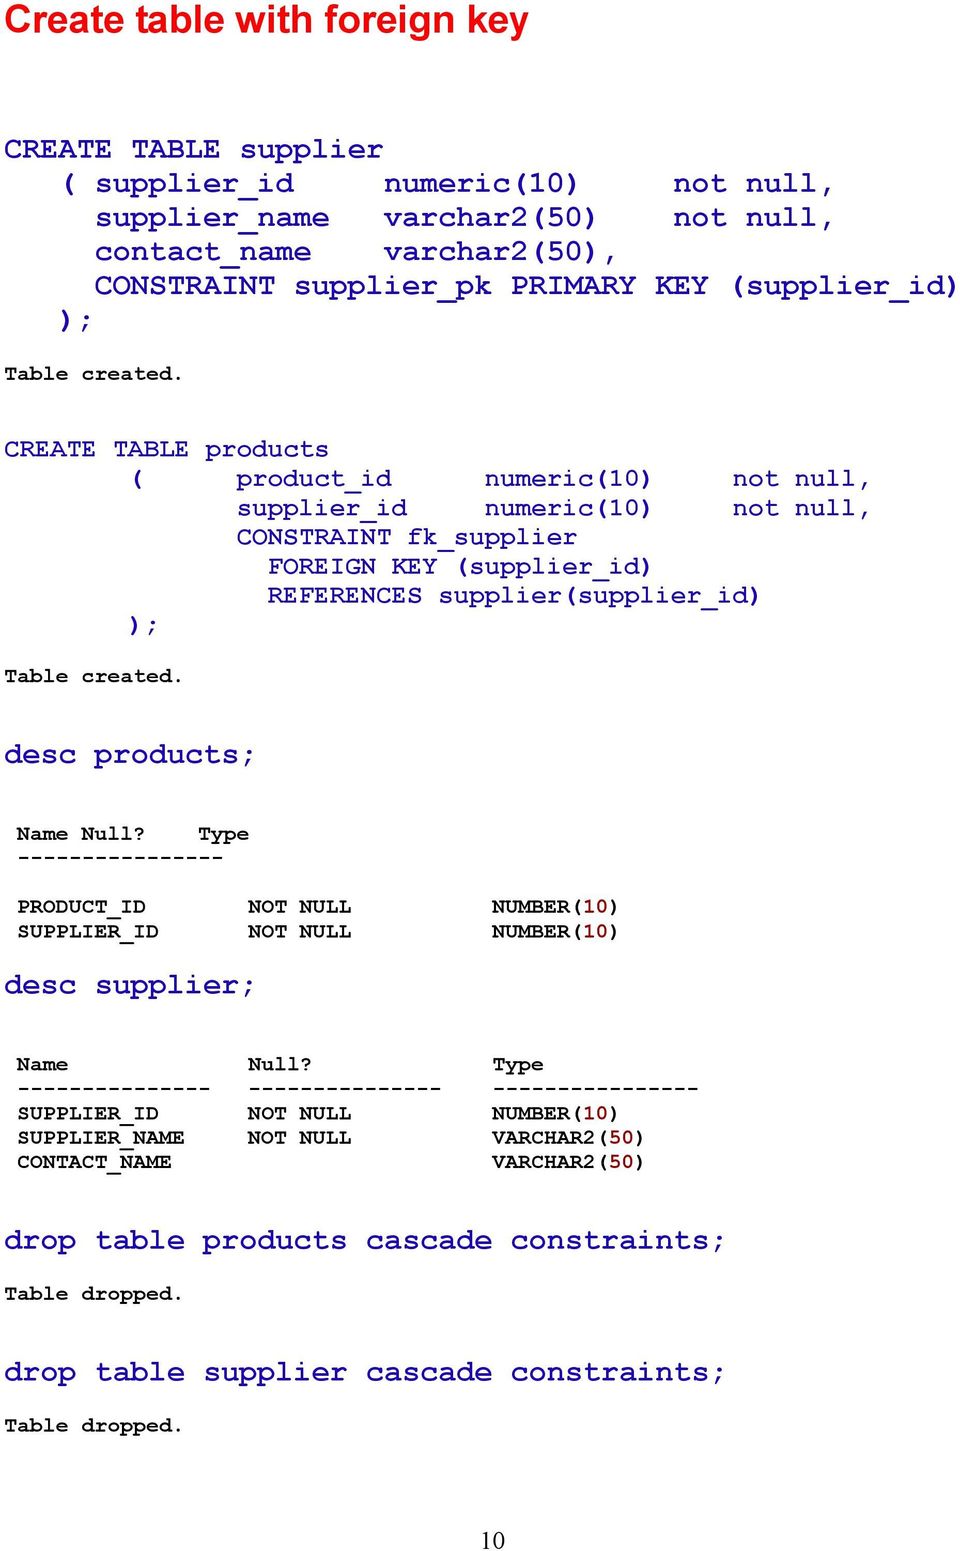 CREATE TABLE products ( product_id numeric(10) not null, supplier_id numeric(10) not null, CONSTRAINT fk_supplier FOREIGN KEY (supplier_id) REFERENCES supplier desc products; Name Null?